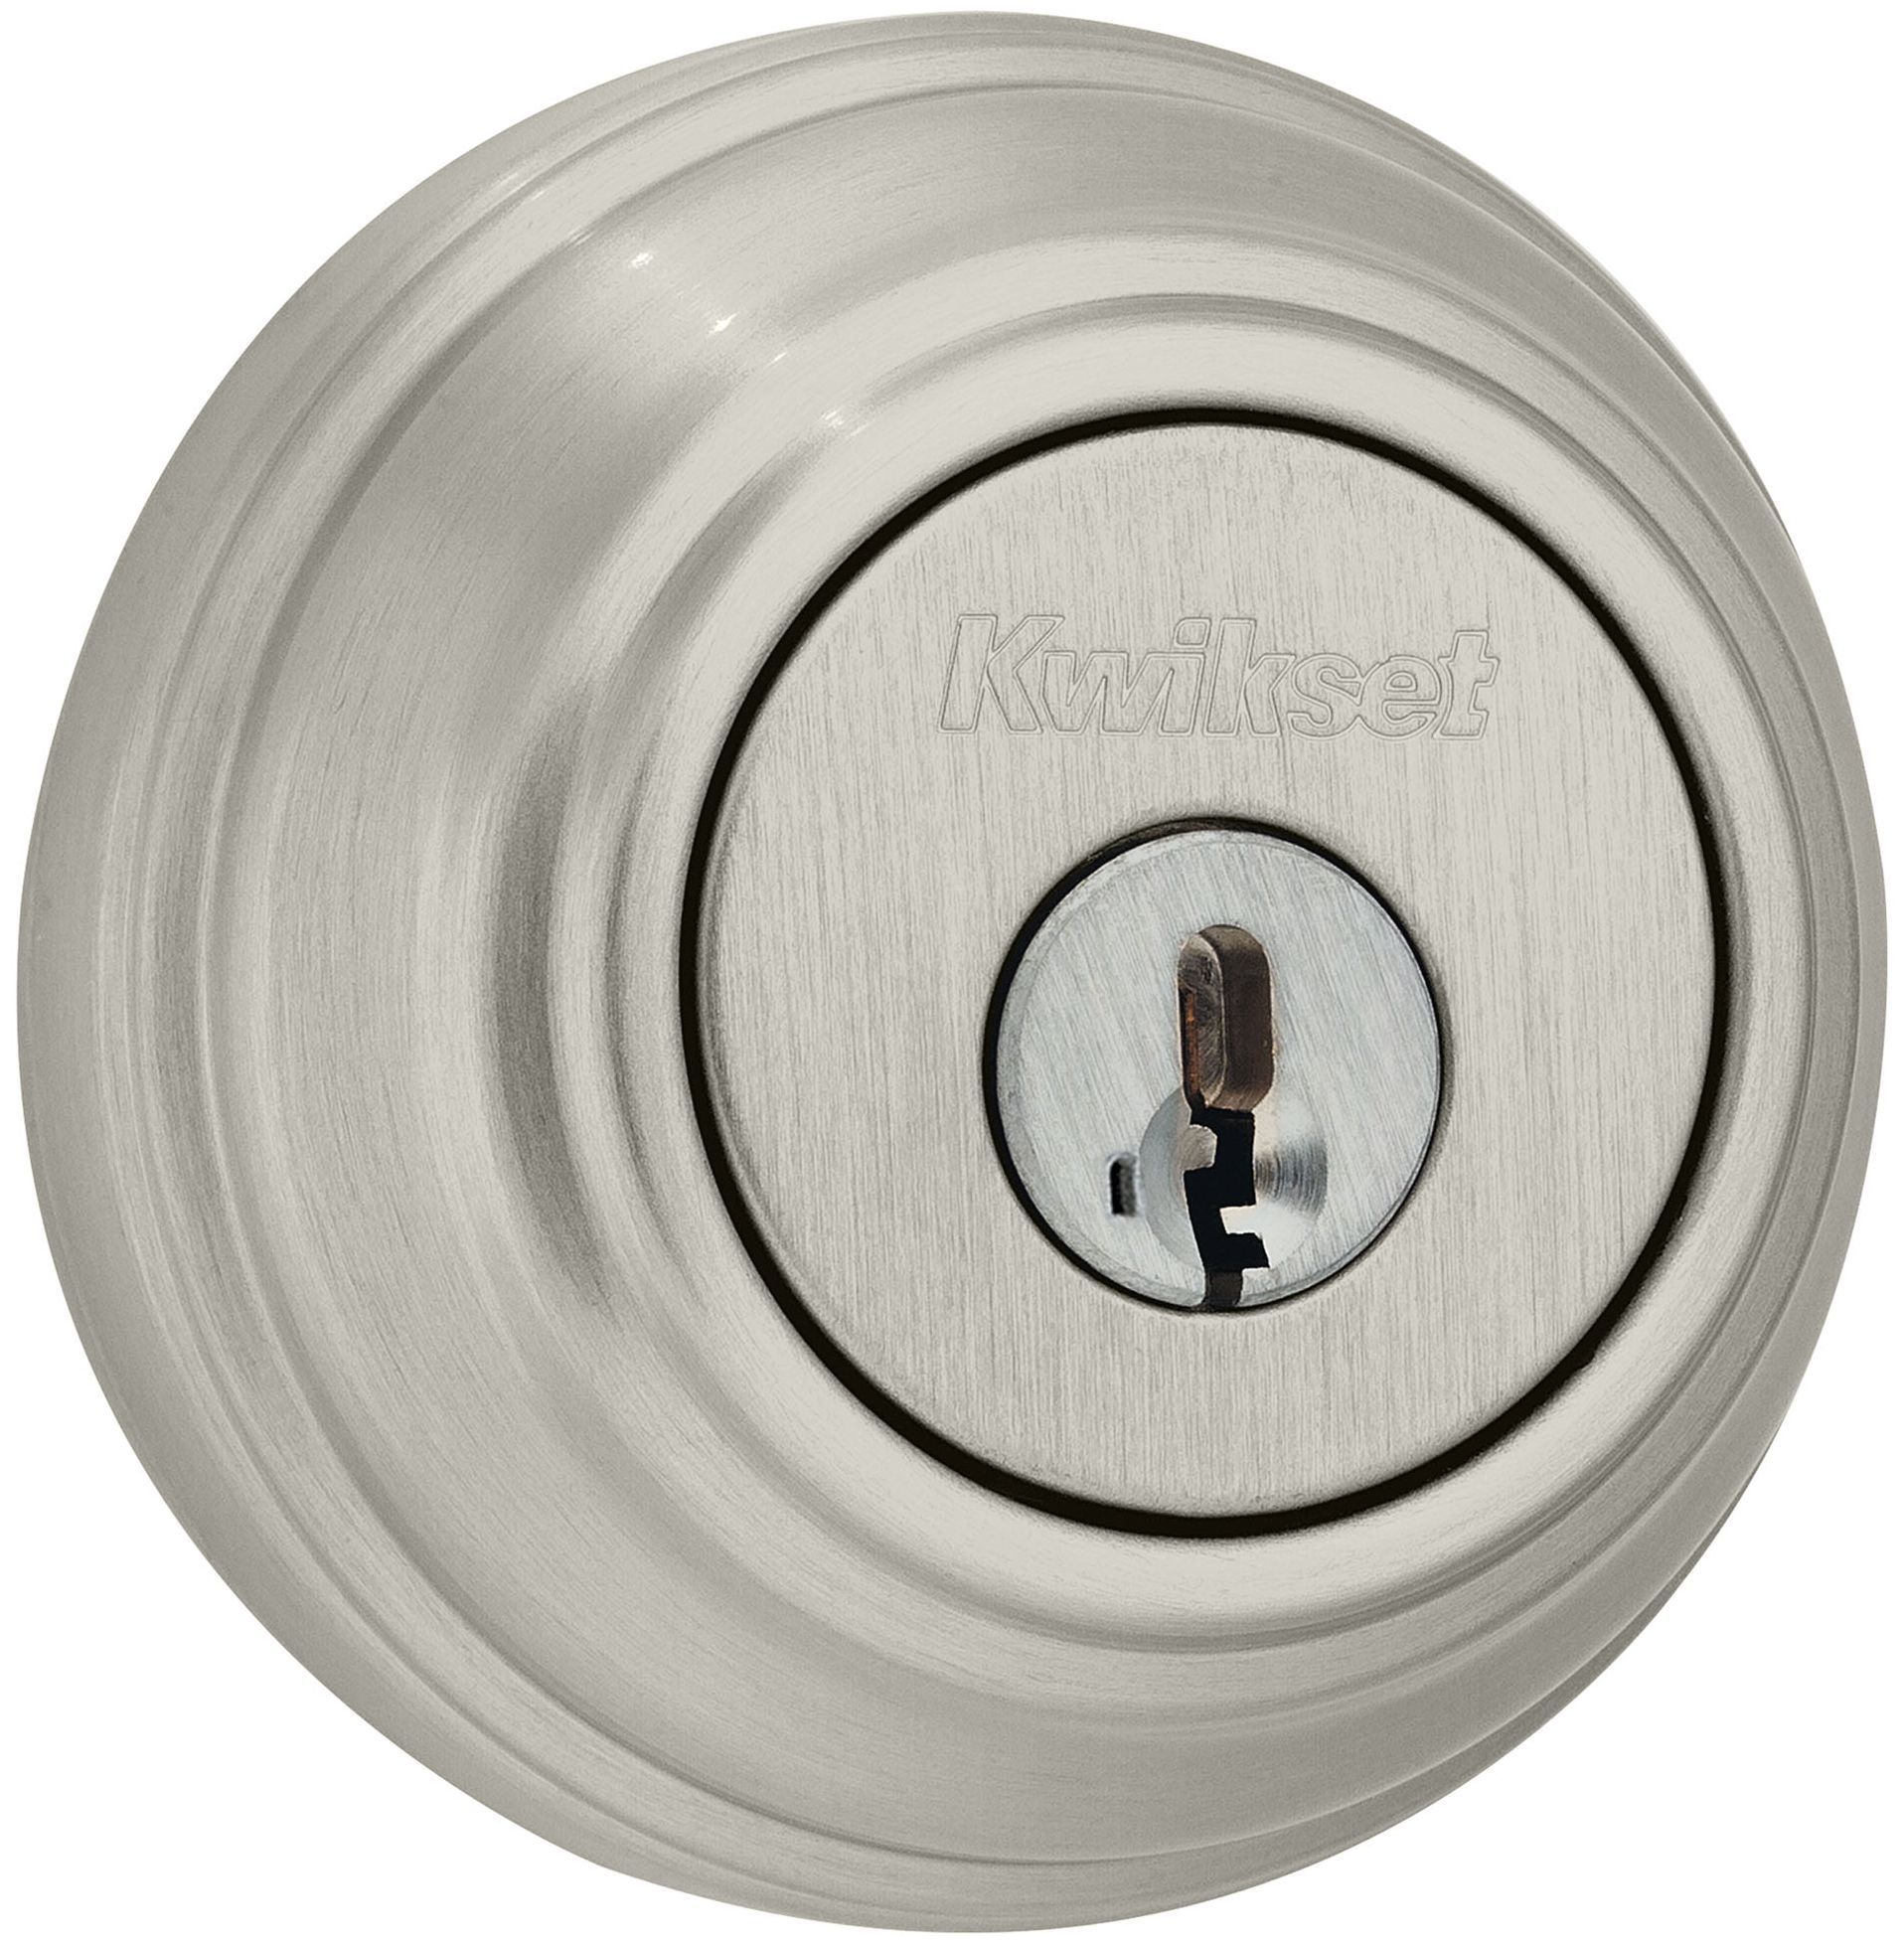 Kwikset 985-15SV1 Satin Nickel Double Cylinder Deadbolt Featuring Smartkey  from the 980 Signature Series Deadbolts